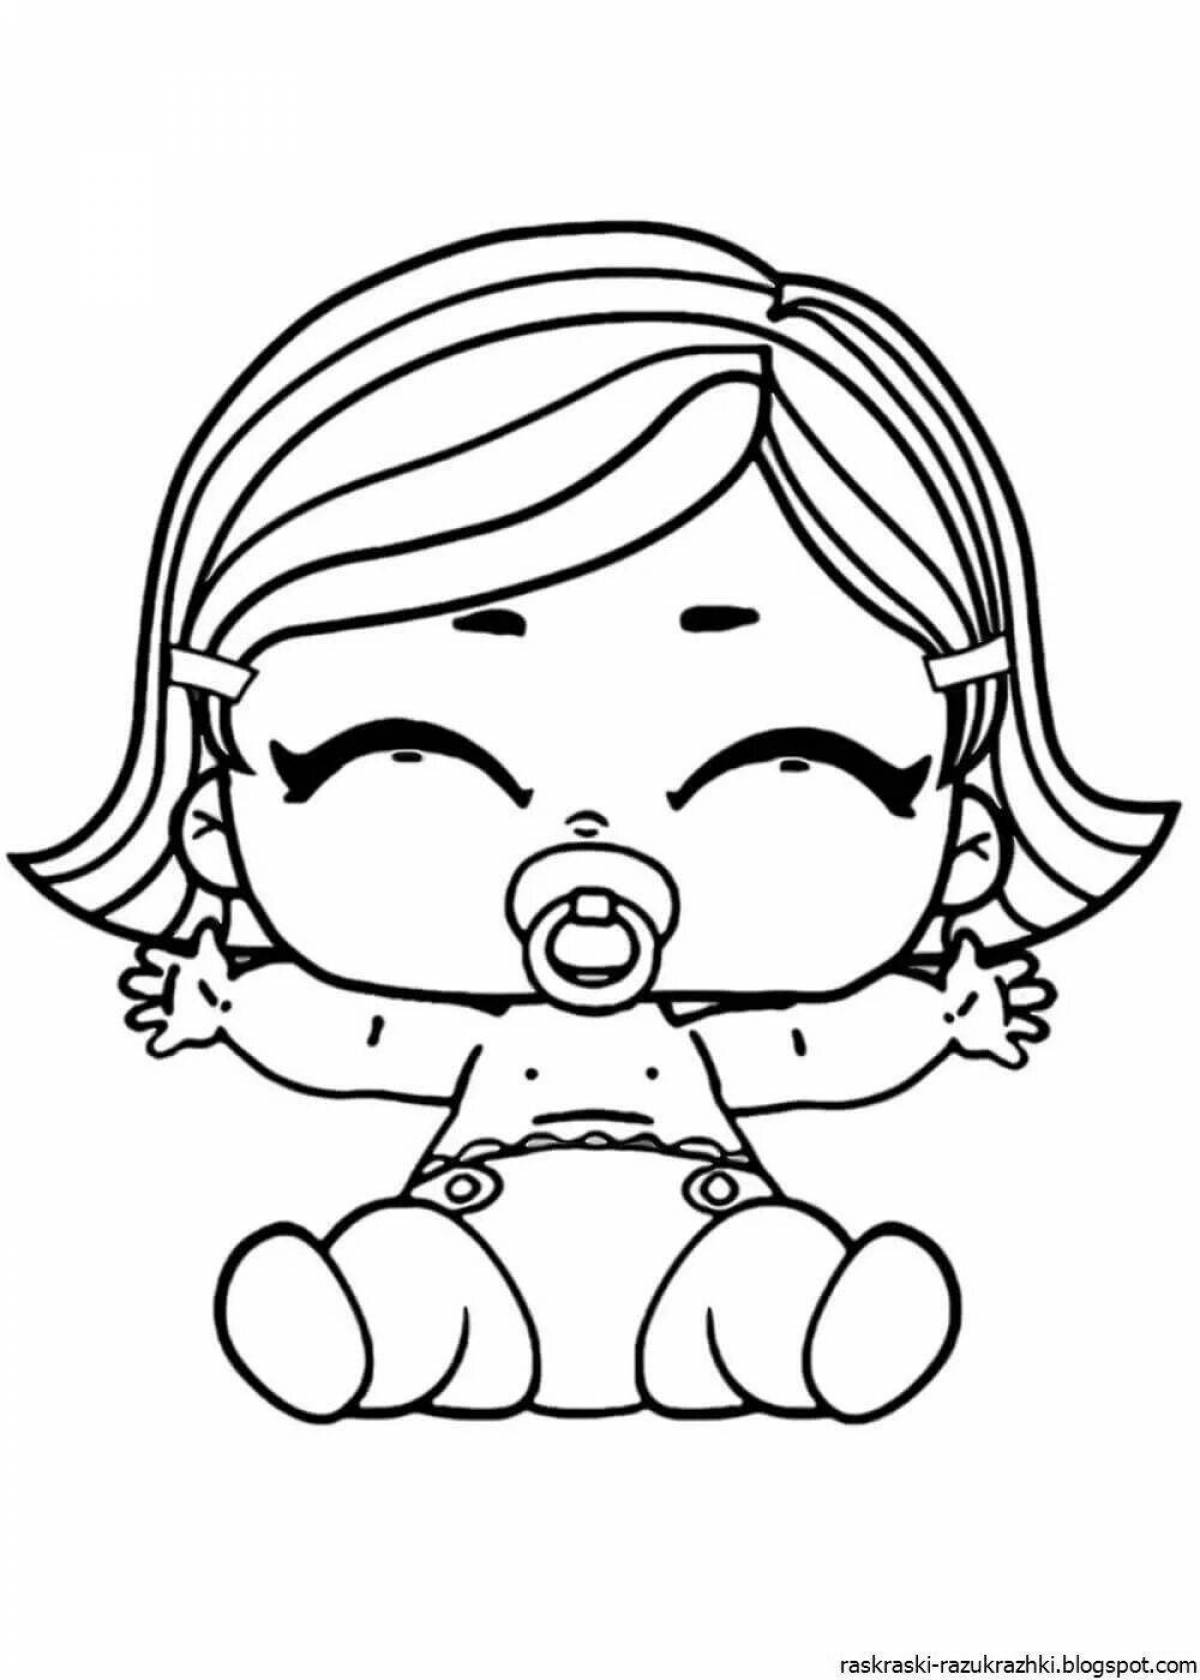 Fluffy doll coloring pages